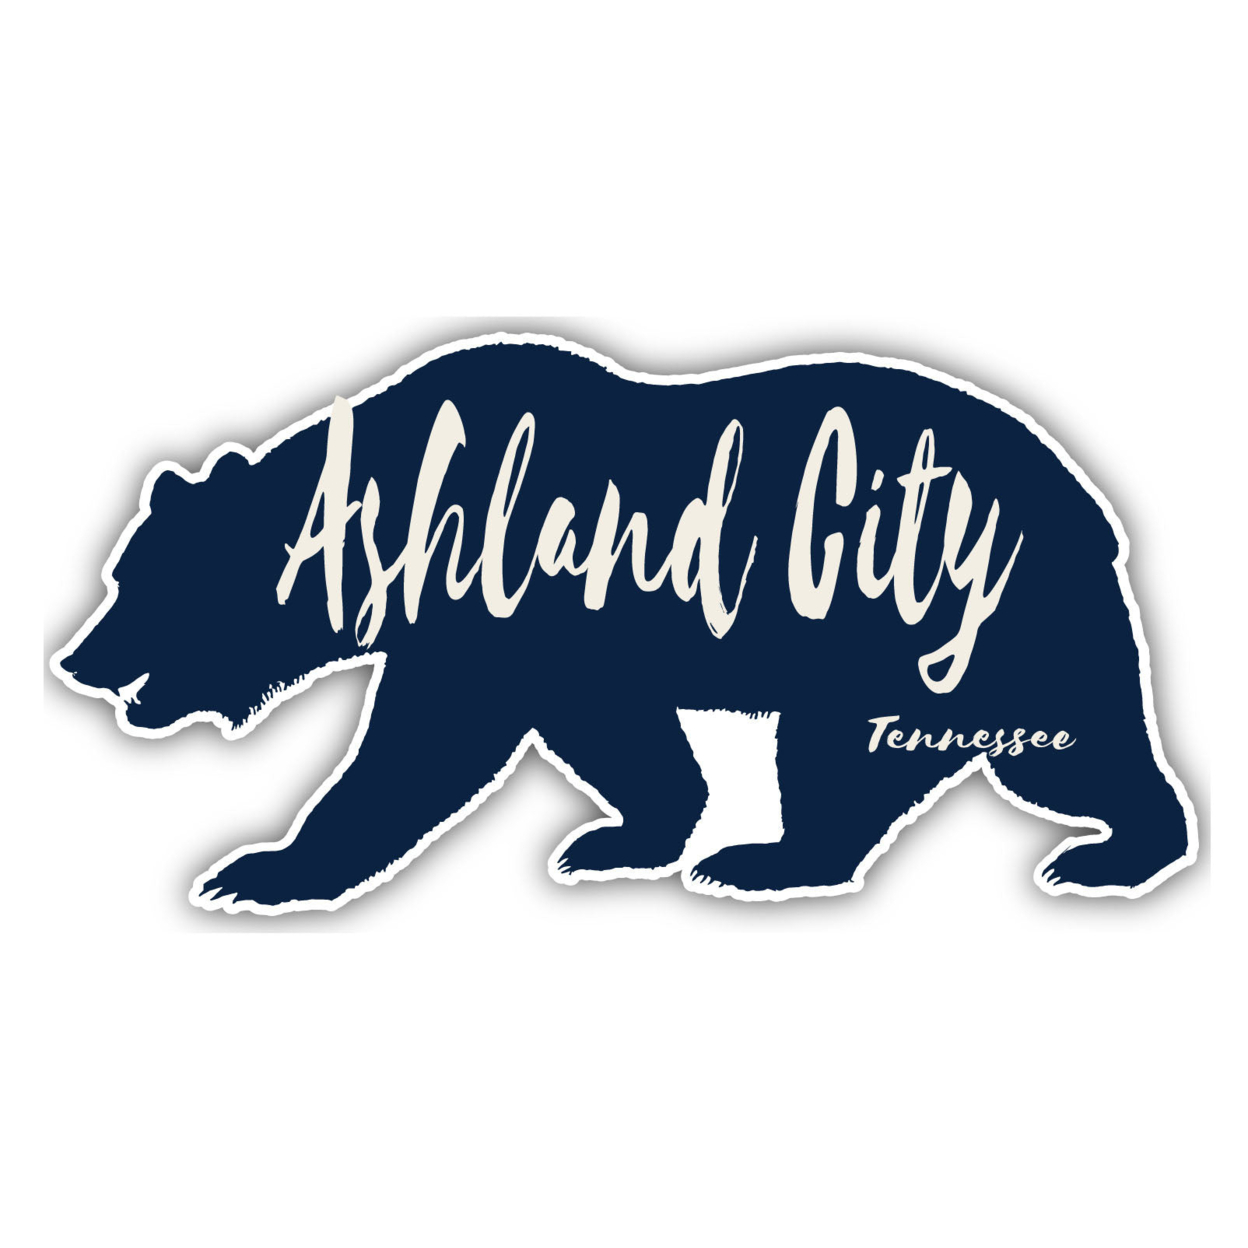 Ashland City Tennessee Souvenir Decorative Stickers (Choose Theme And Size) - 4-Pack, 6-Inch, Bear